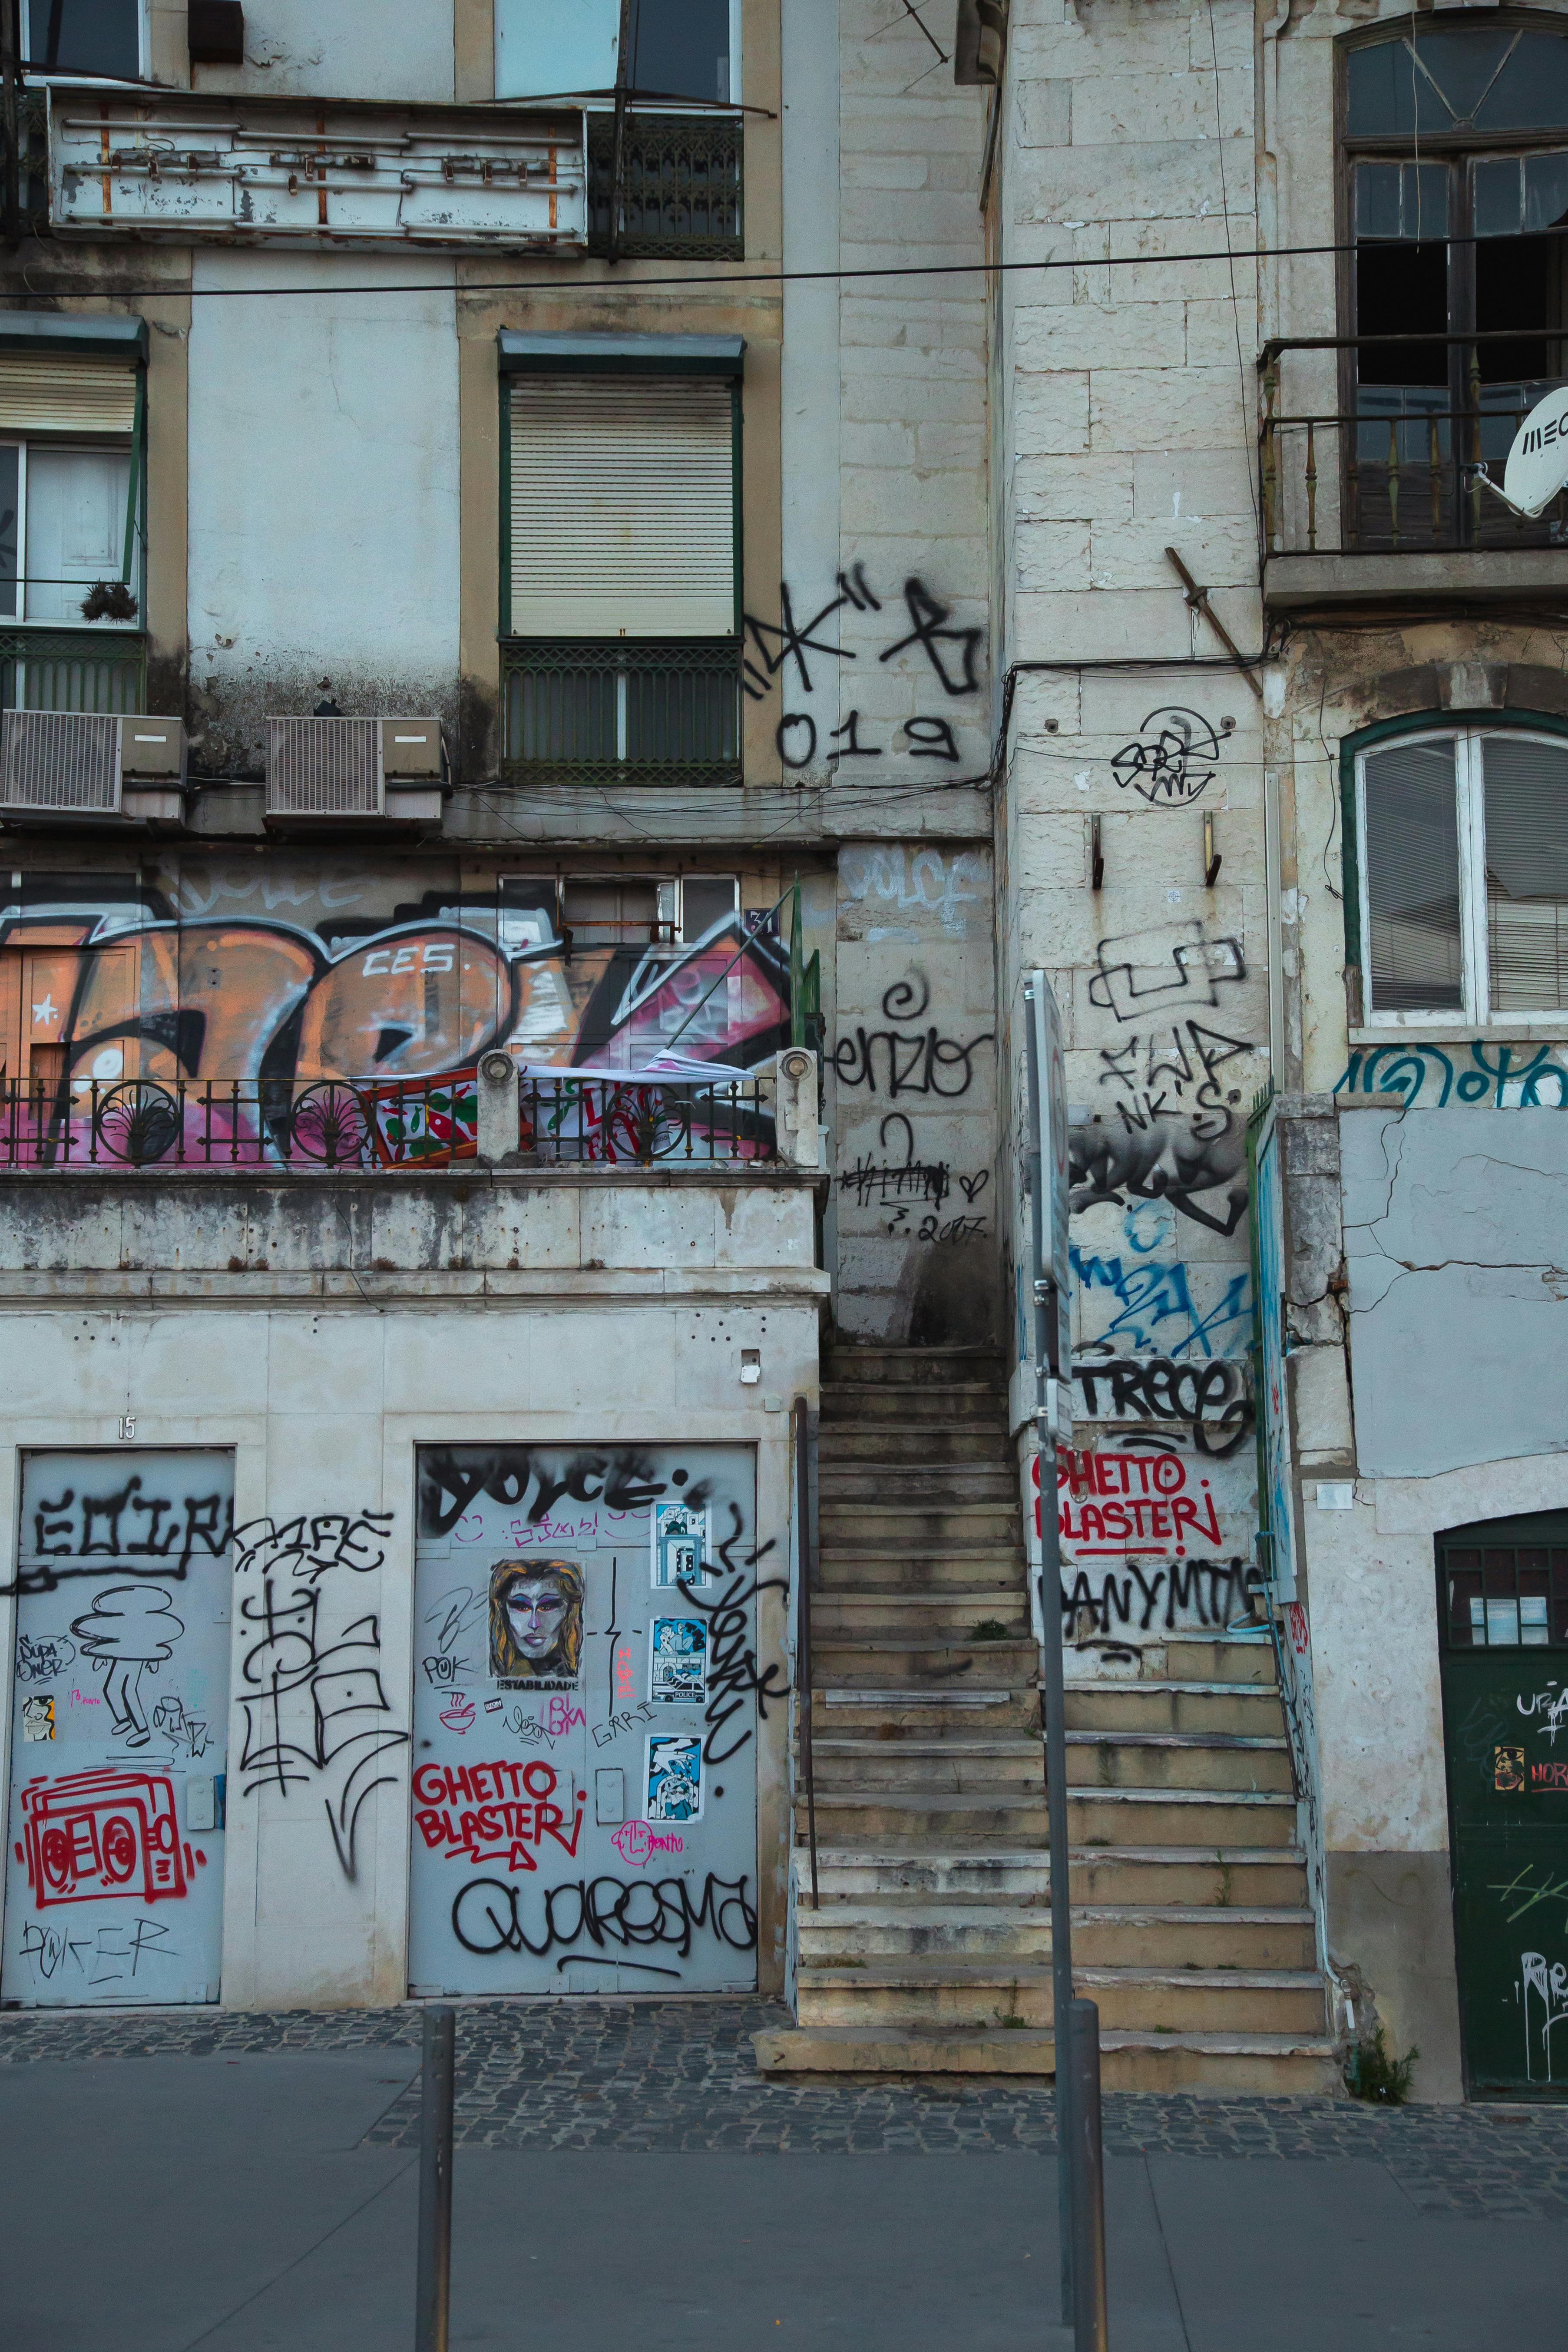 exterior of shabby building with graffiti